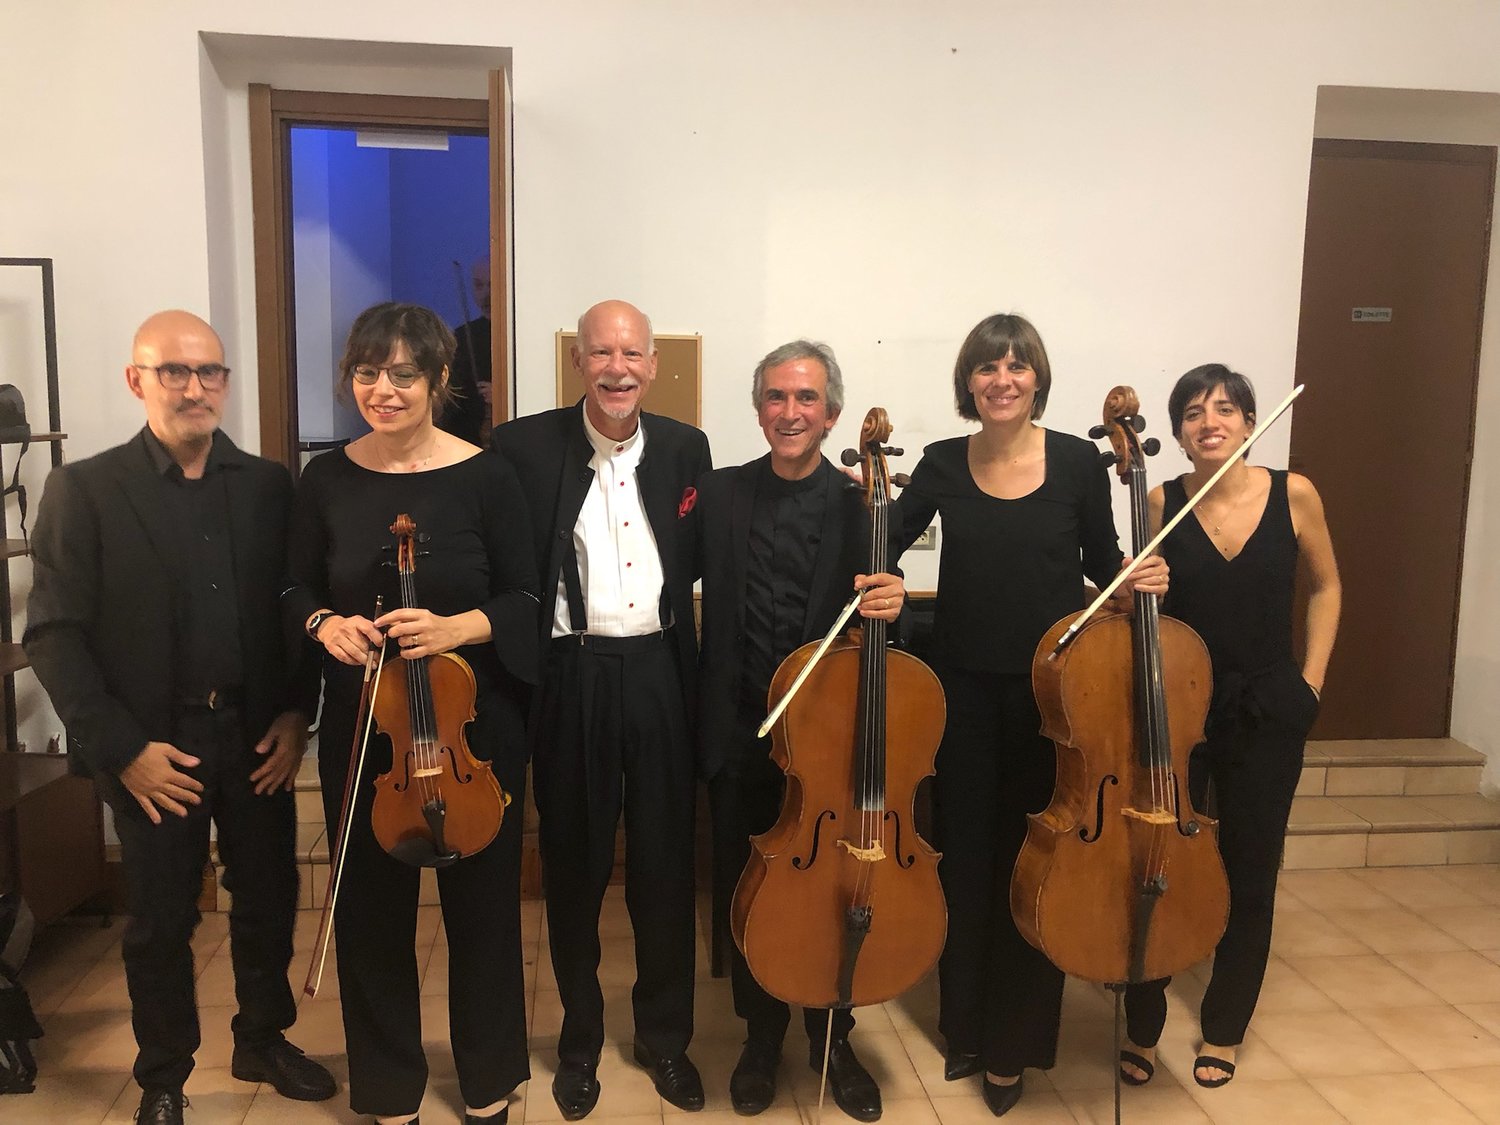 Post-concert reception with principal strings of the orchestra